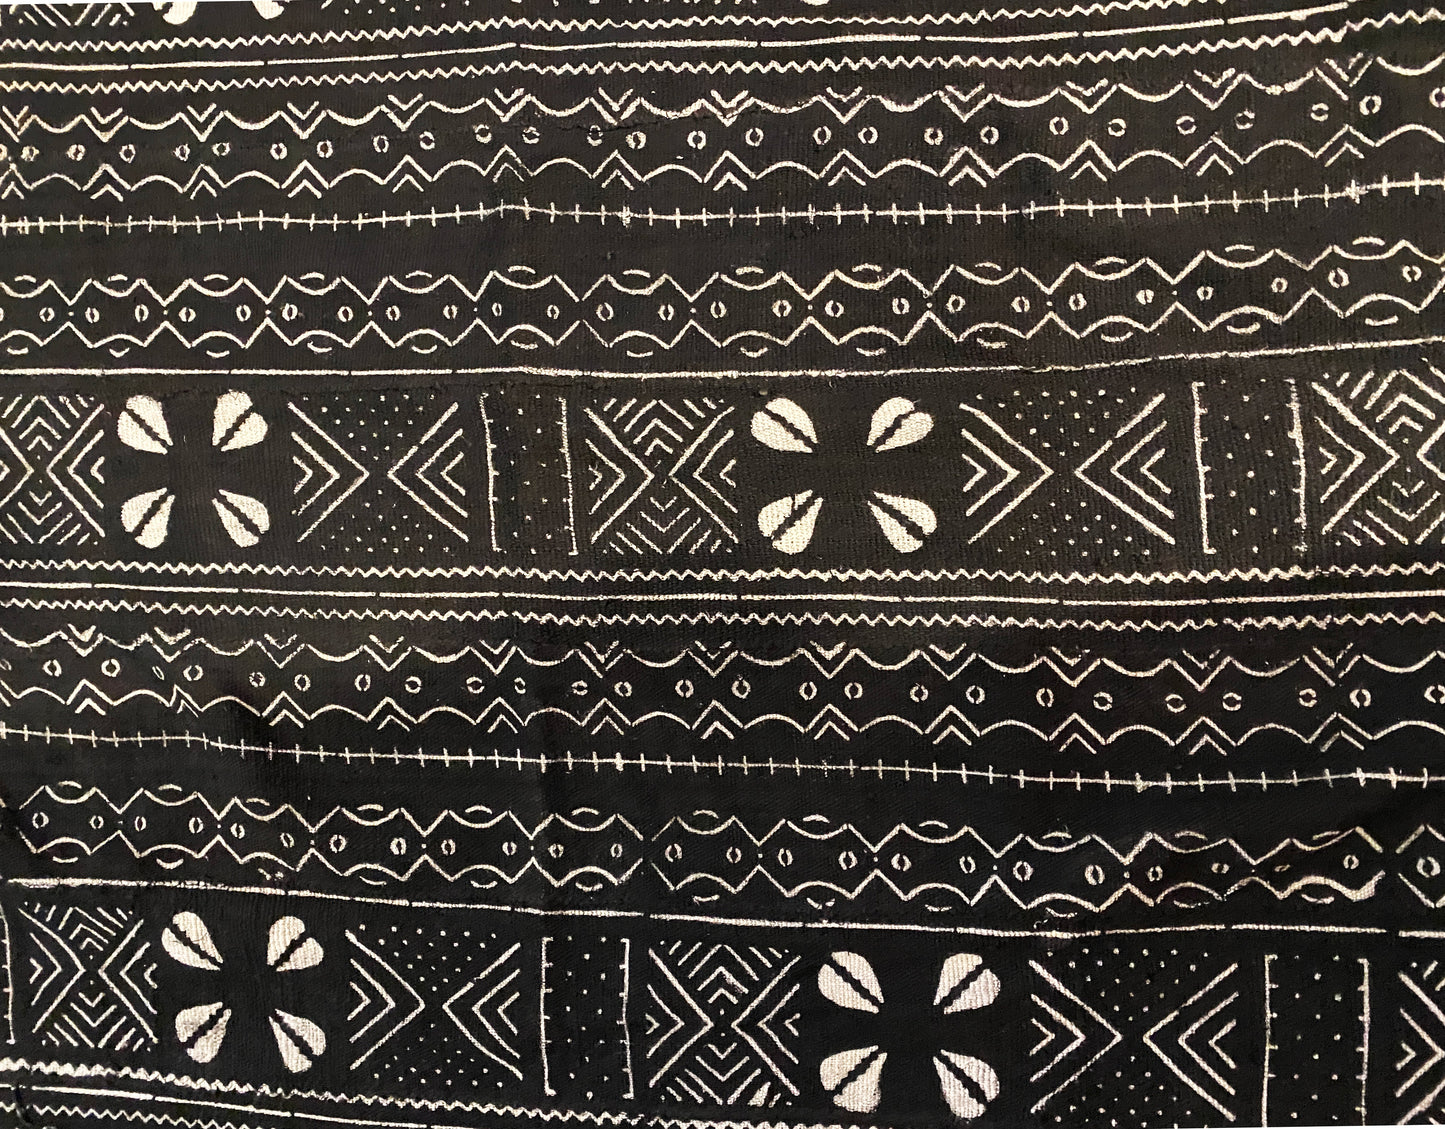 African Black and White Mud Cloth Textile Mali 43" by 64" #3681